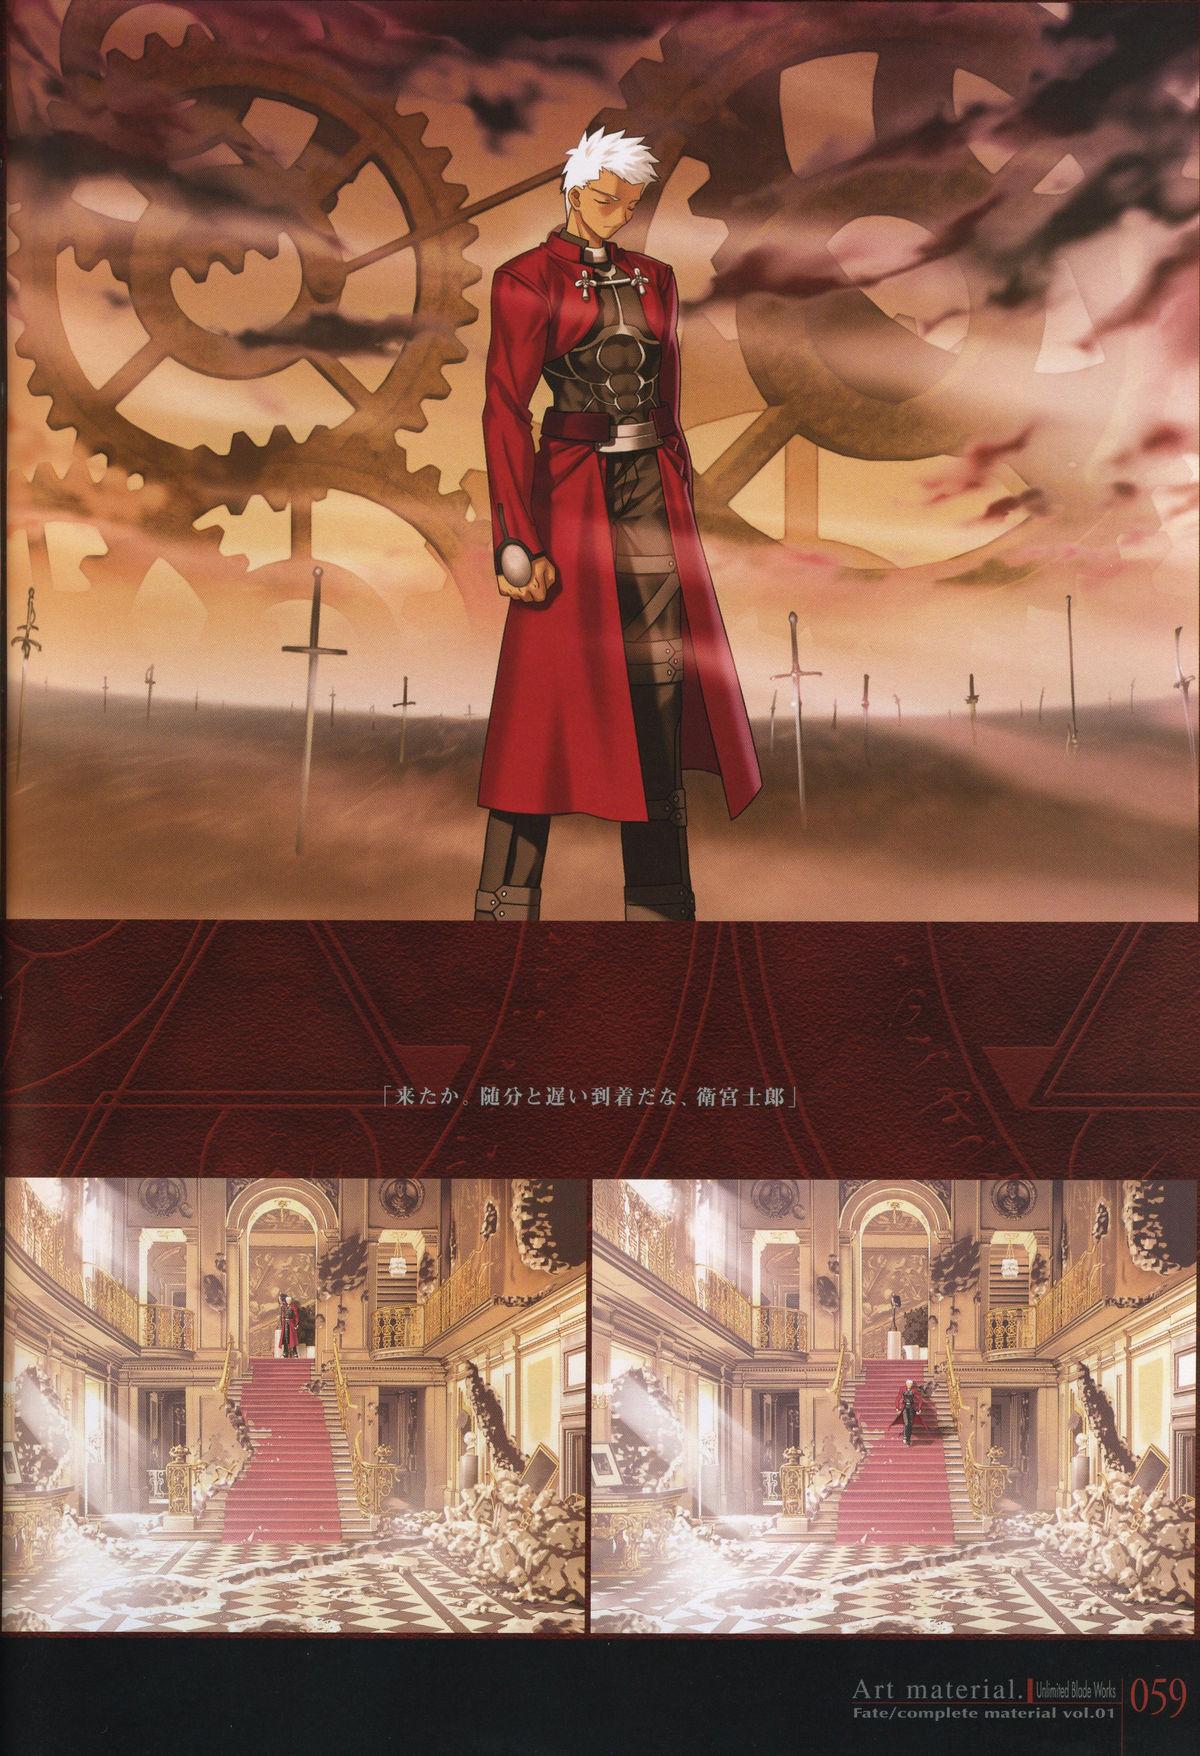 Fate/complete material I - Art material. 63